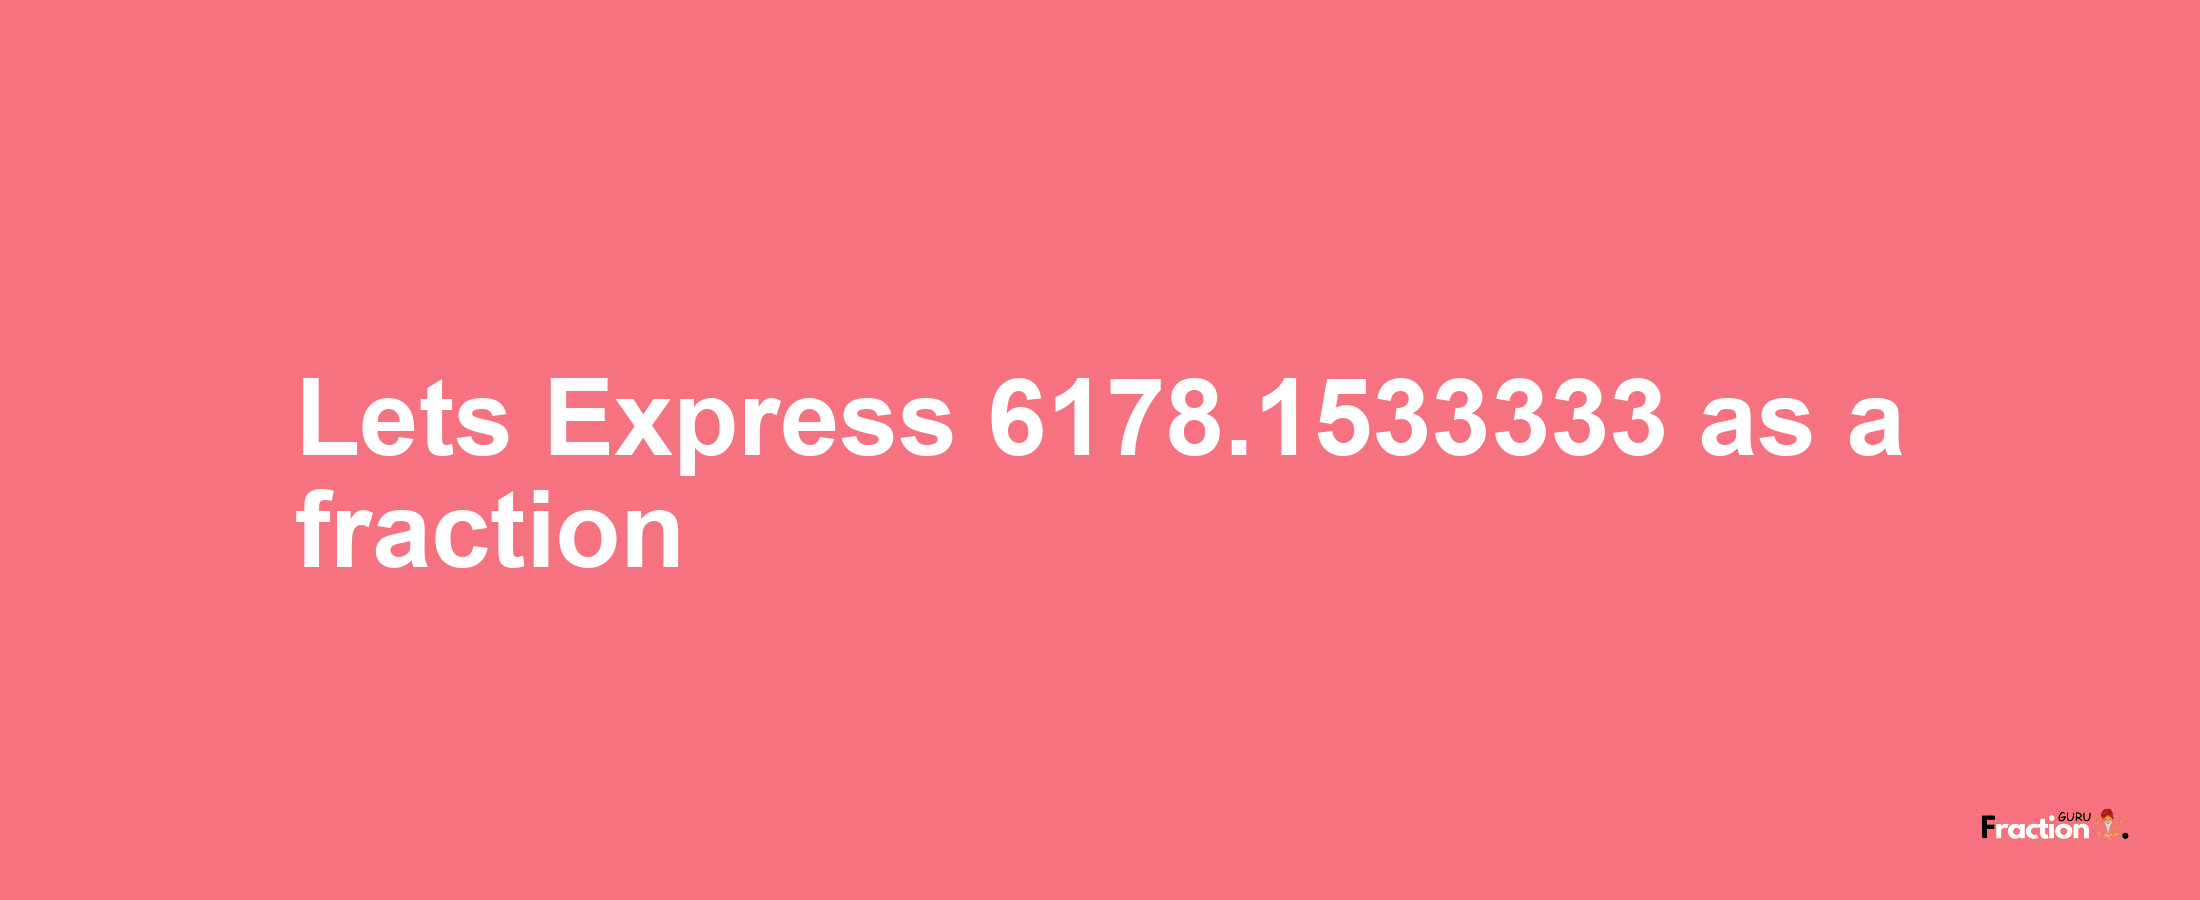 Lets Express 6178.1533333 as afraction